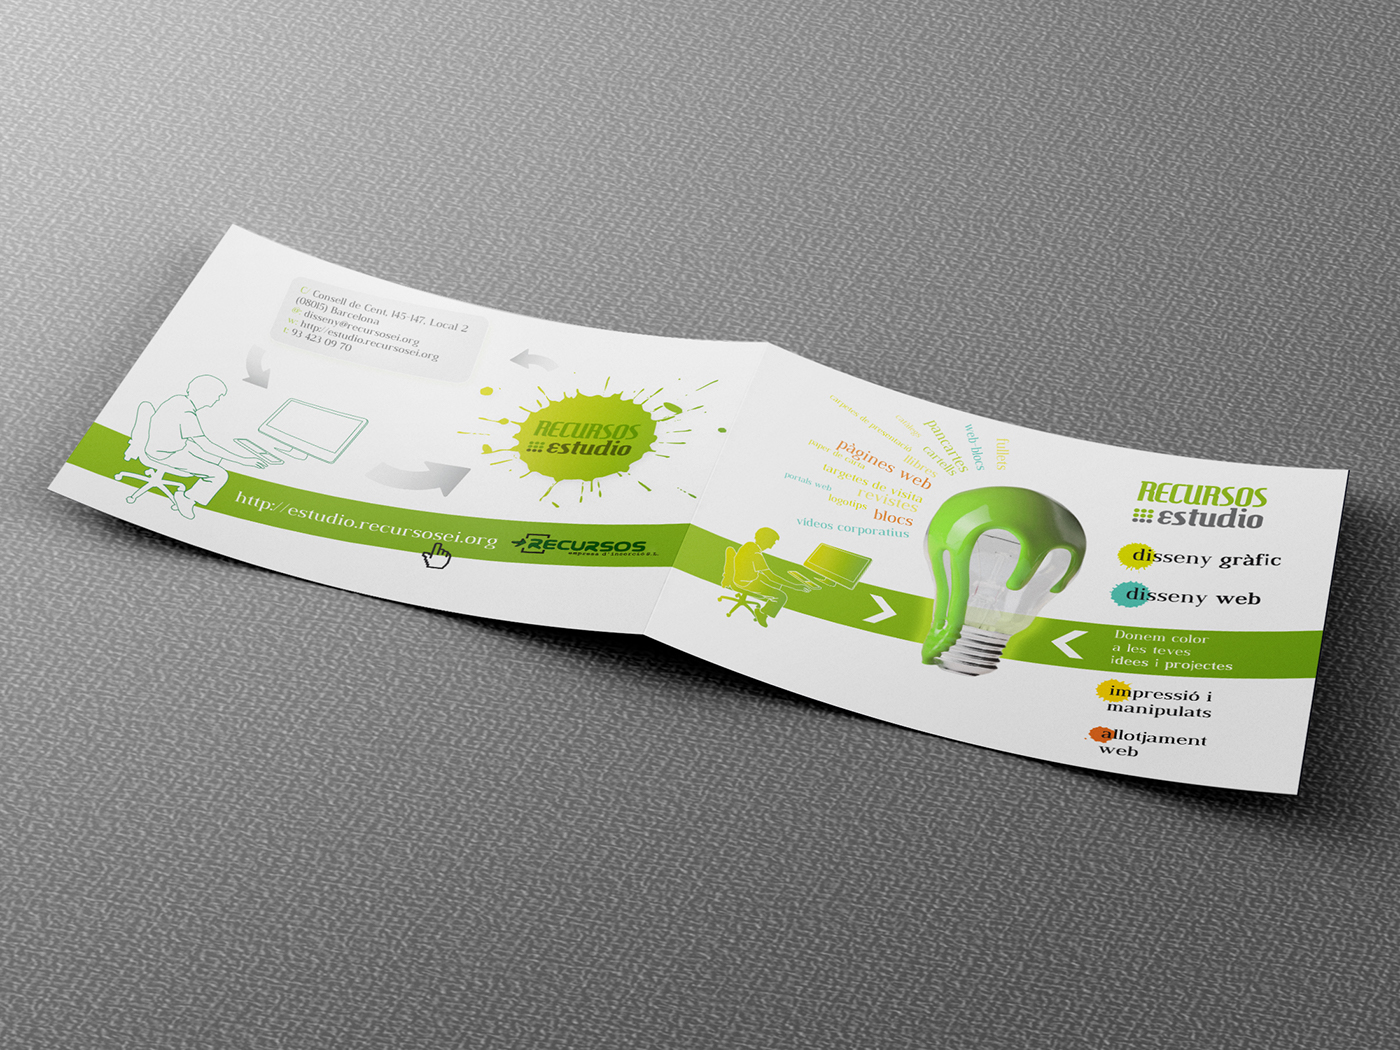 catering services online offline green social charity banner rollup Van vinyl Signage Stationery Vehicle